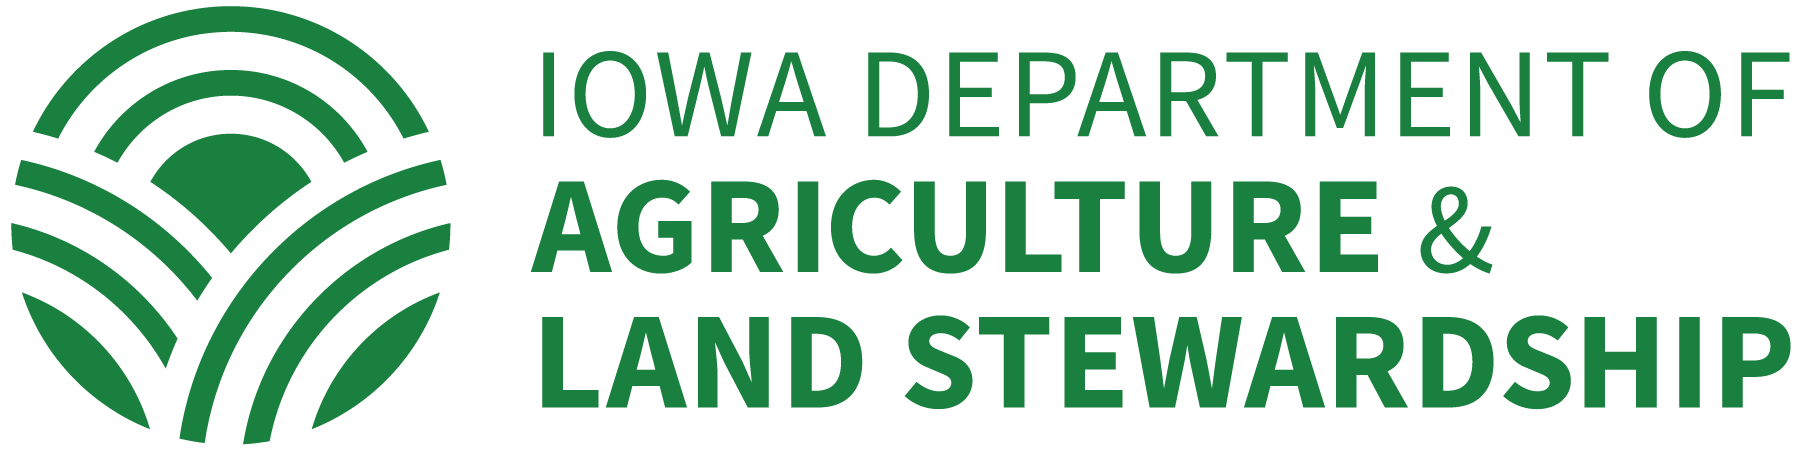 Department of agriculture iowa jobs